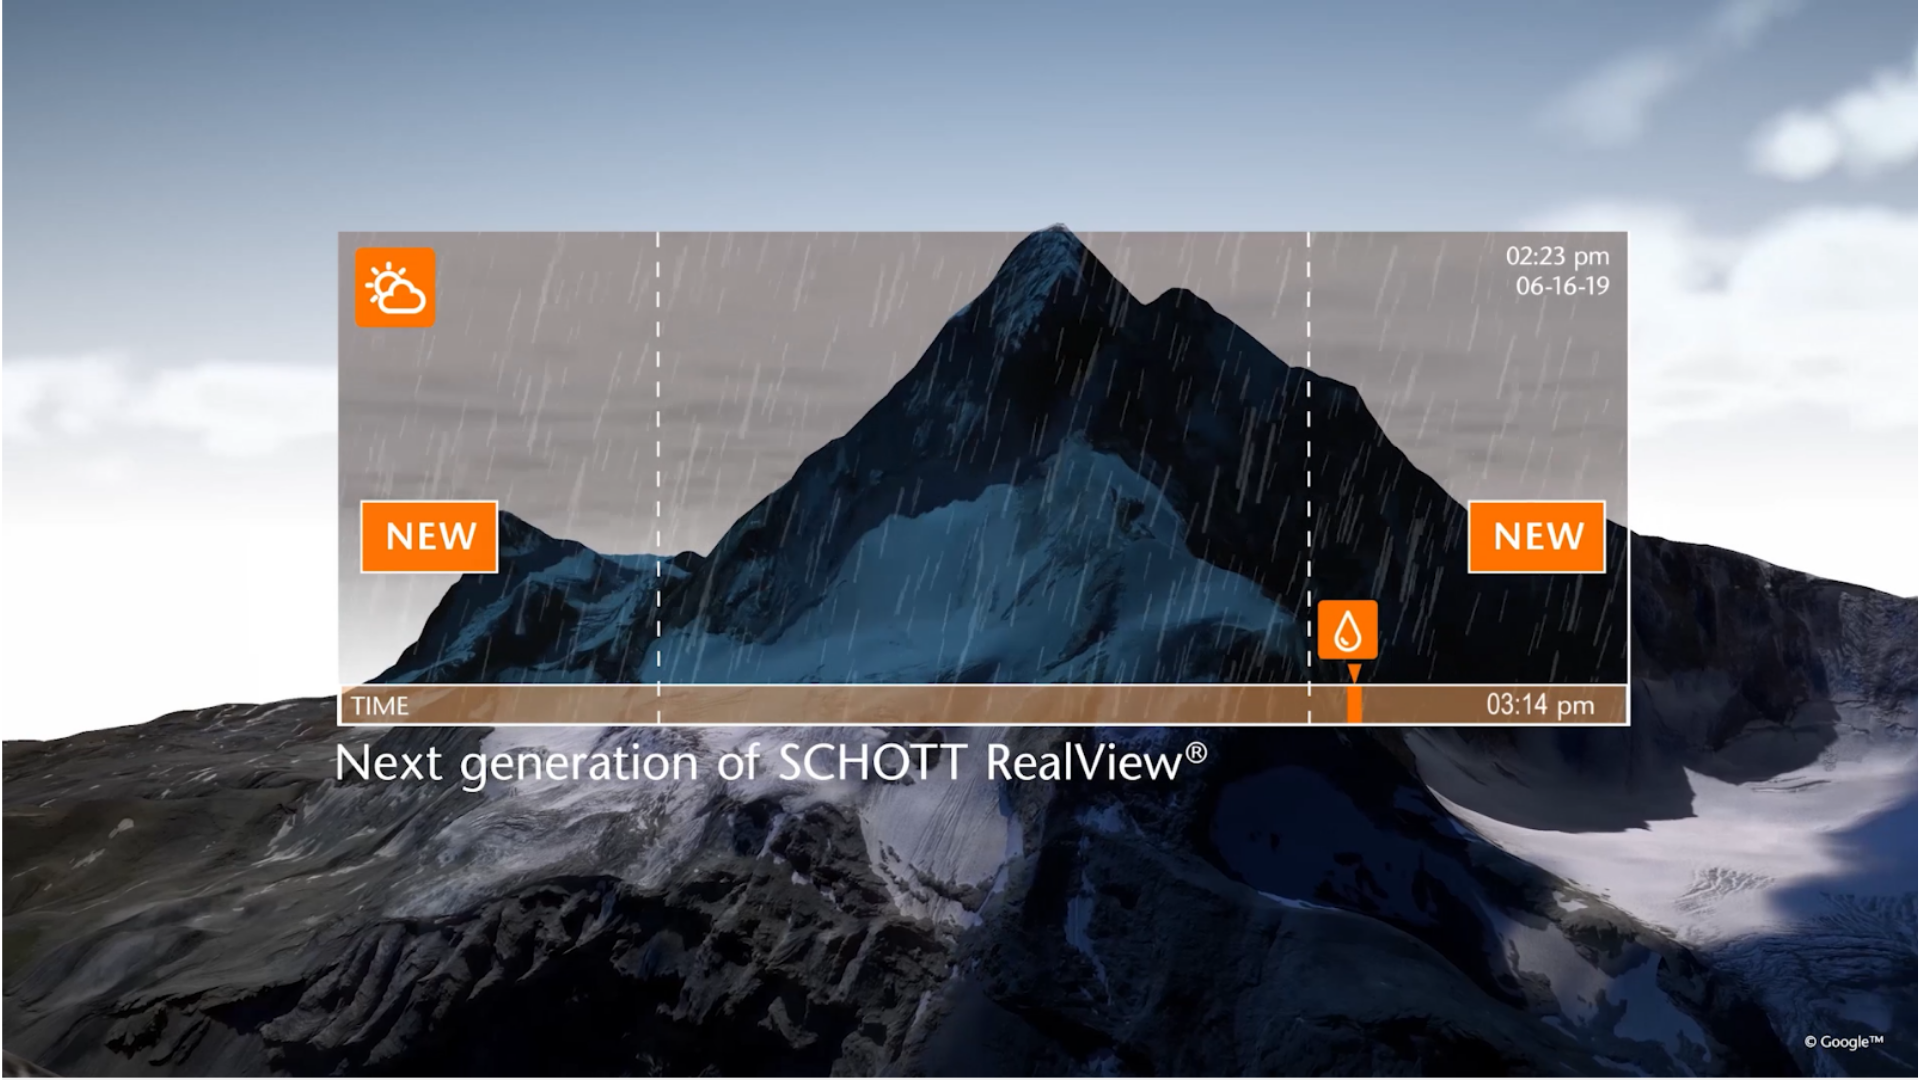 Click to discover how SCHOTT RealView® offers vital information for the day ahead